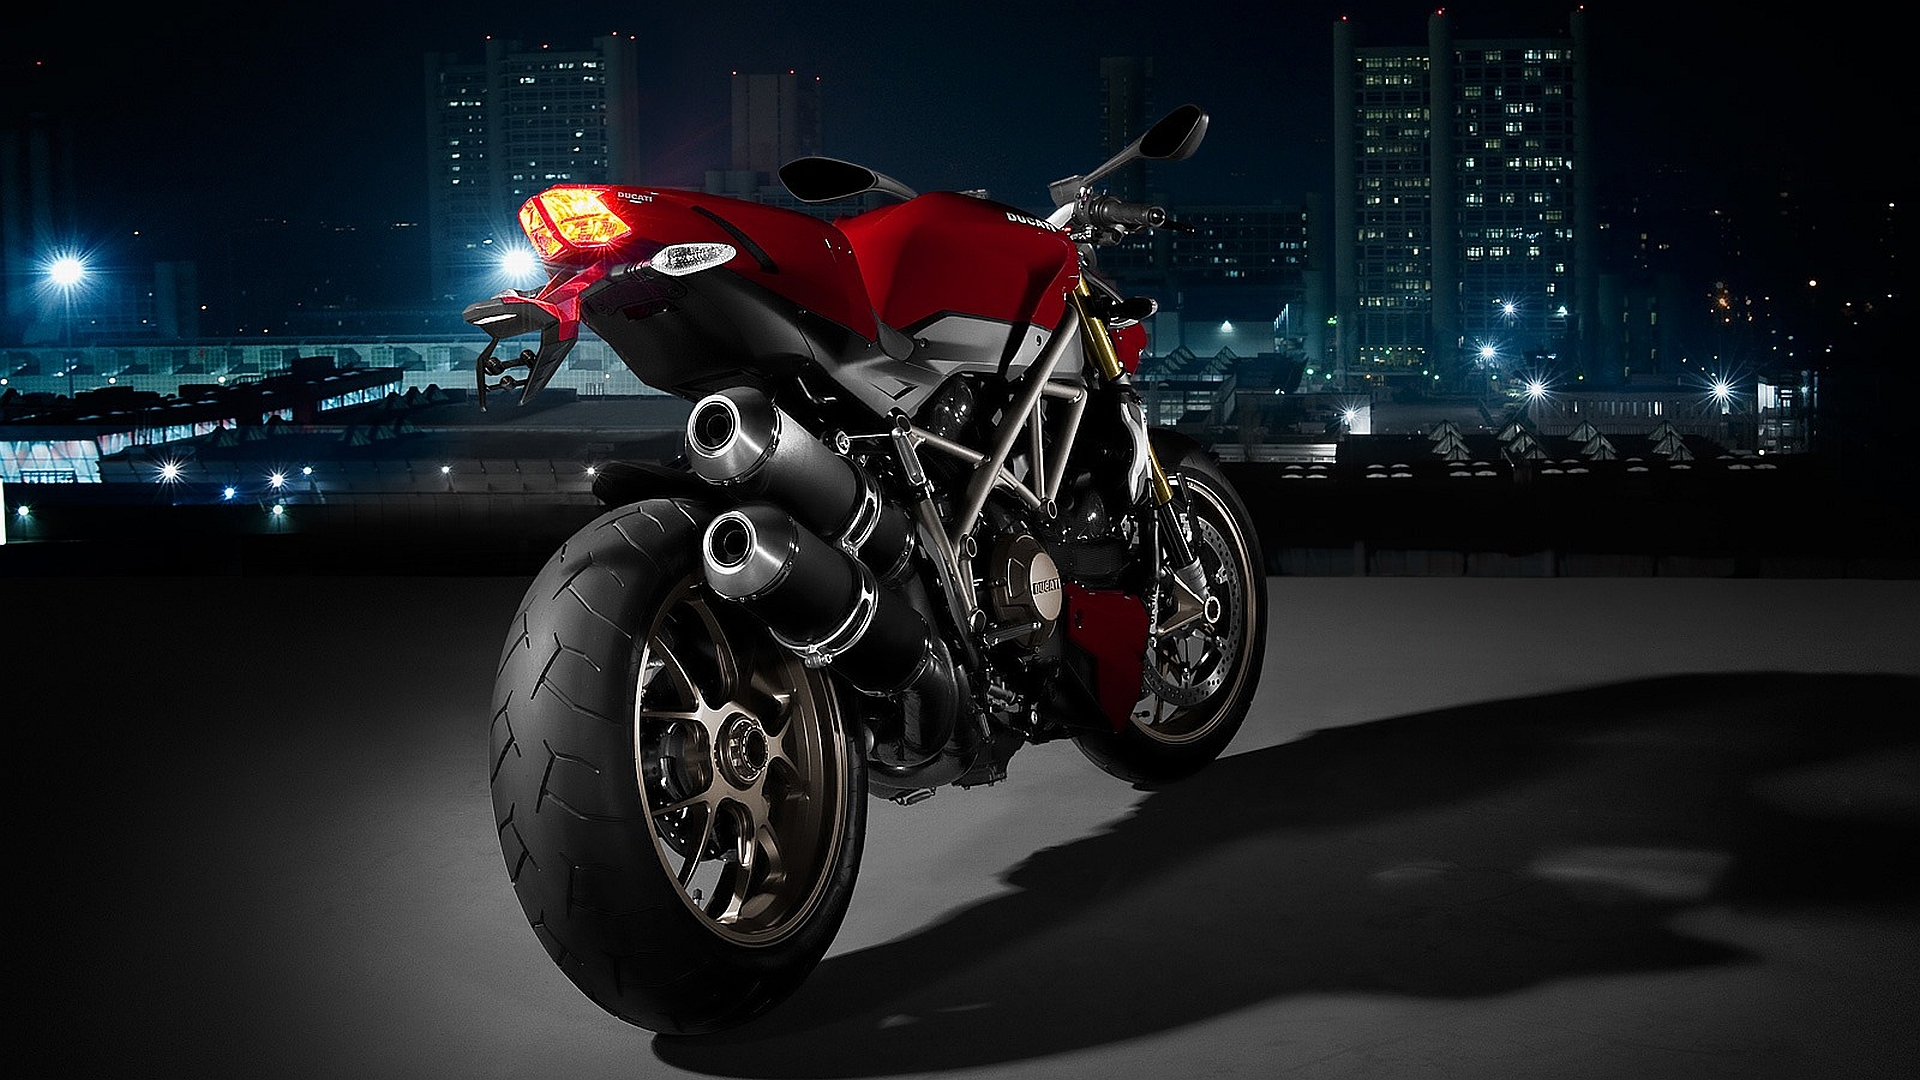 ducati, vehicles, motorcycles wallpaper for mobile